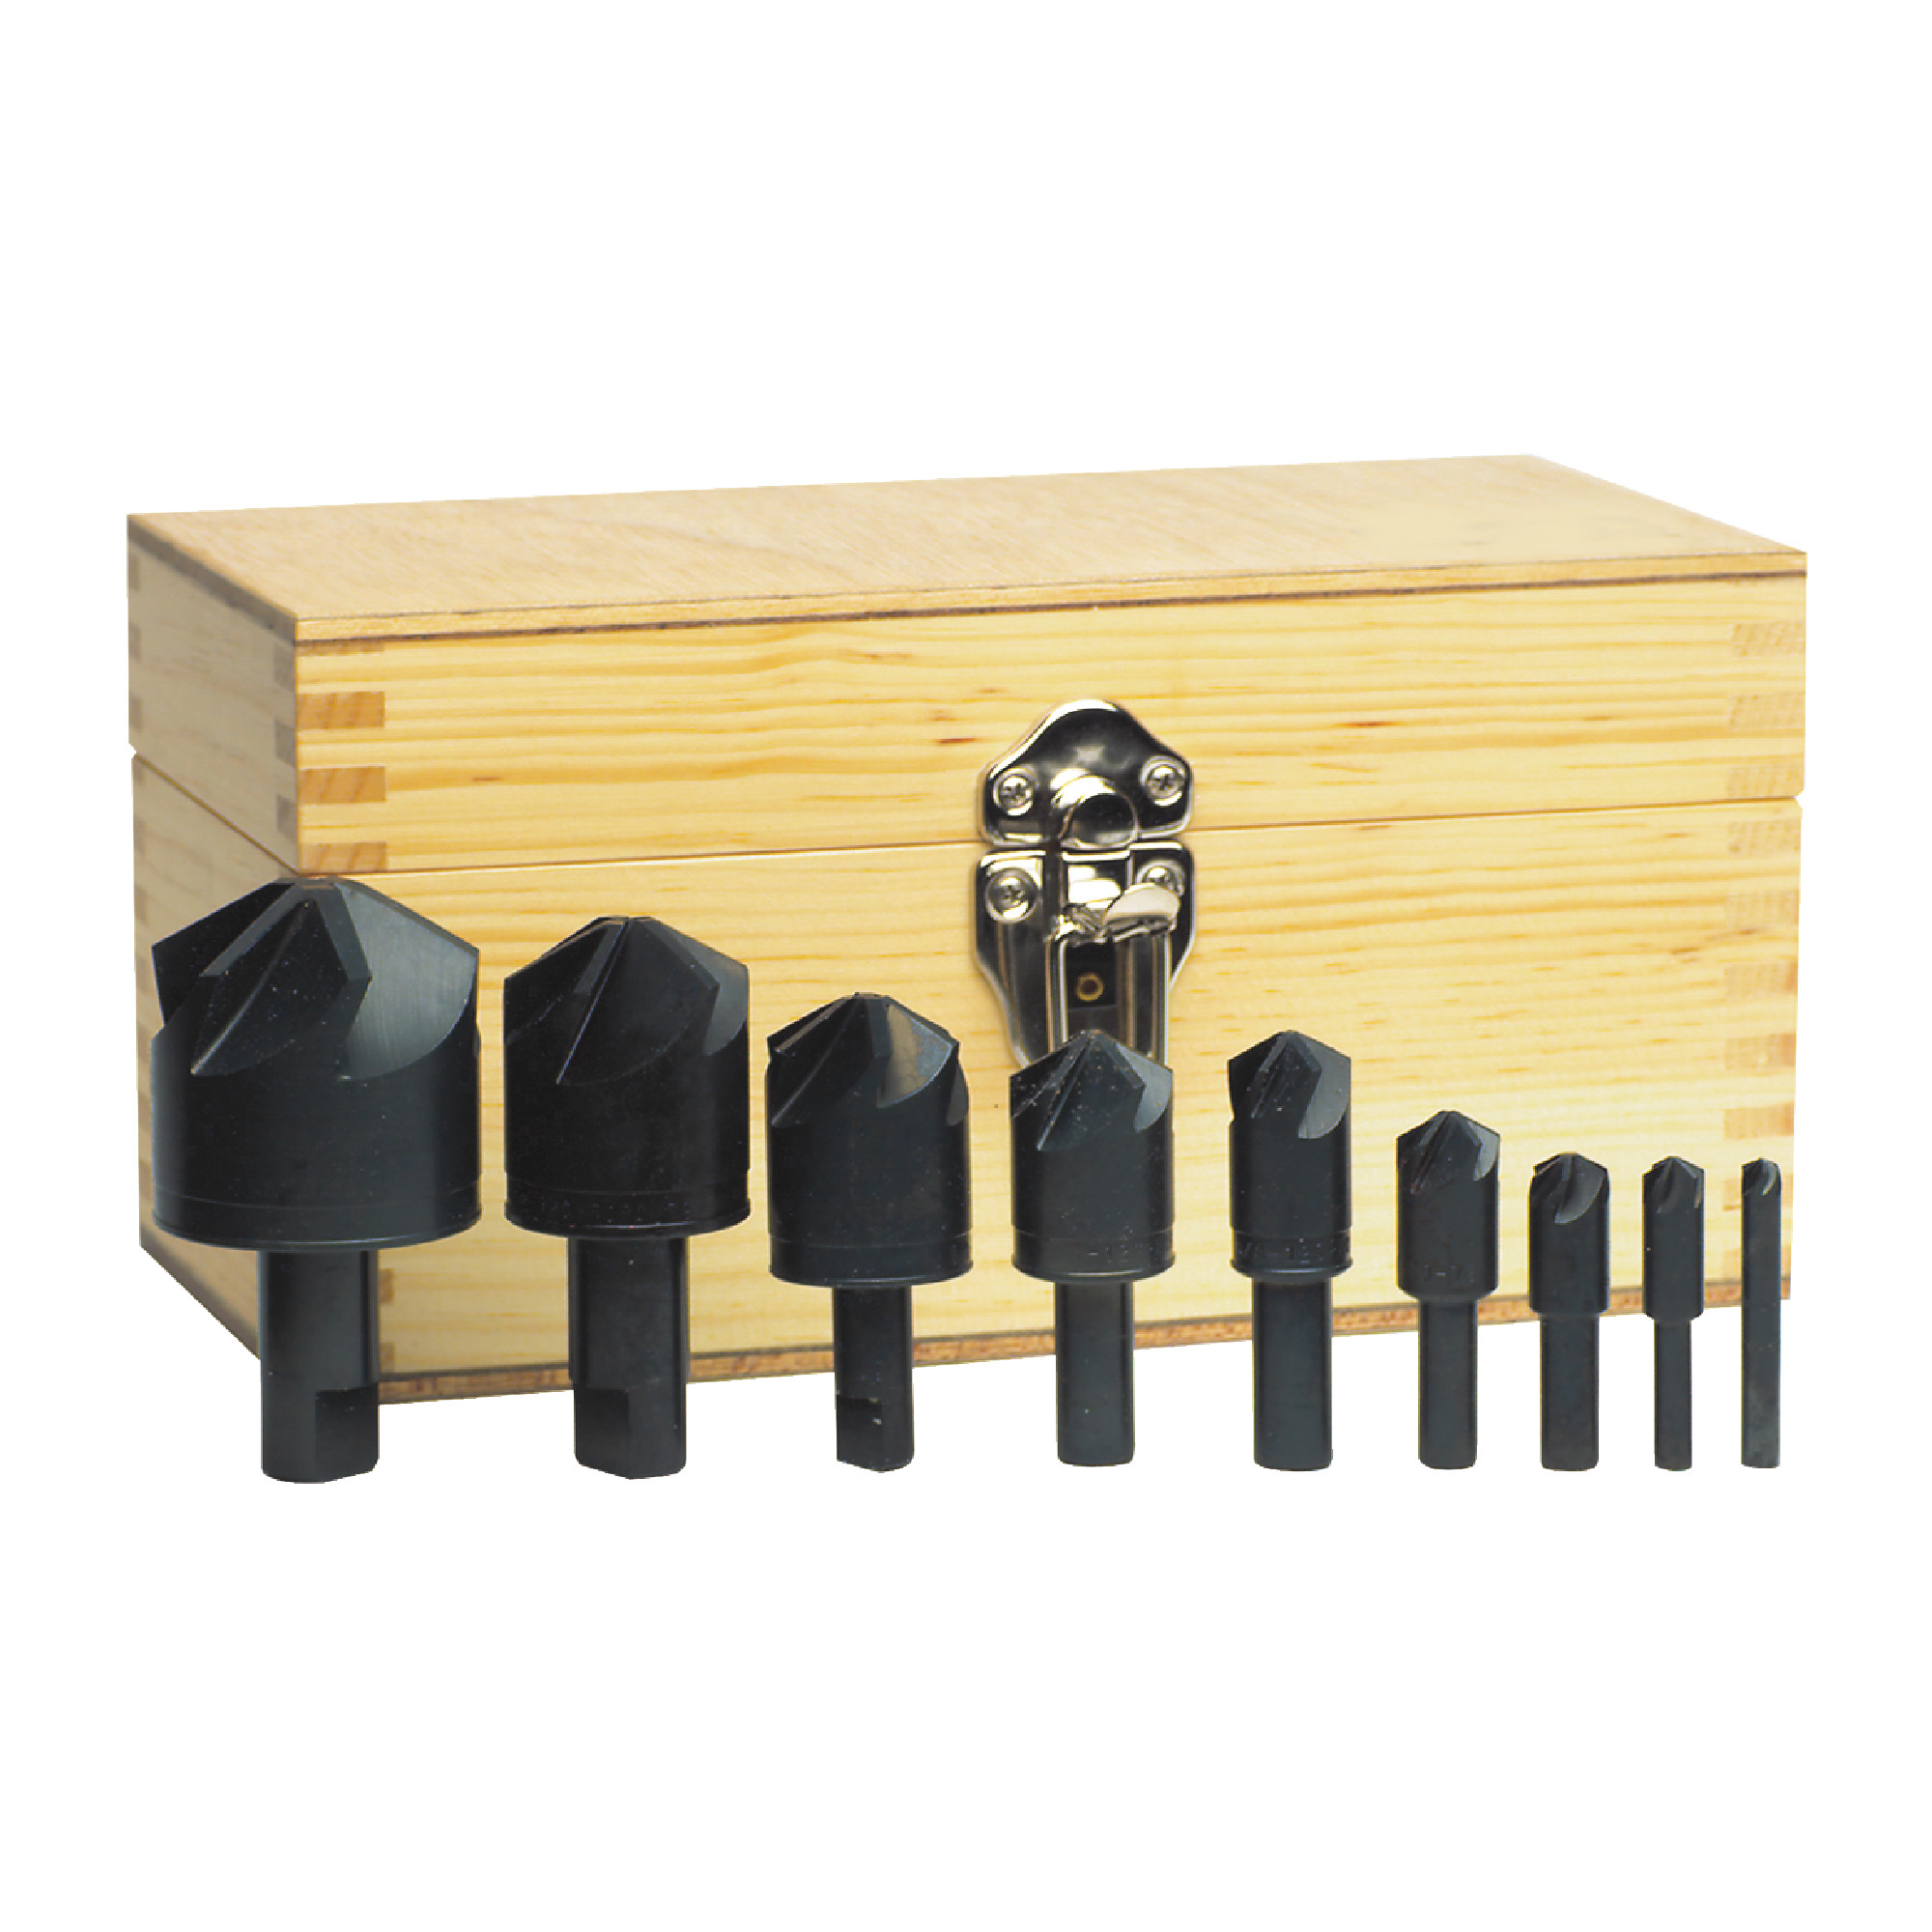 M.A. FORD 6 Flute 9 Piece 1/4" to 2" High Speed Steel 120&#176; Included Angle Countersink Set